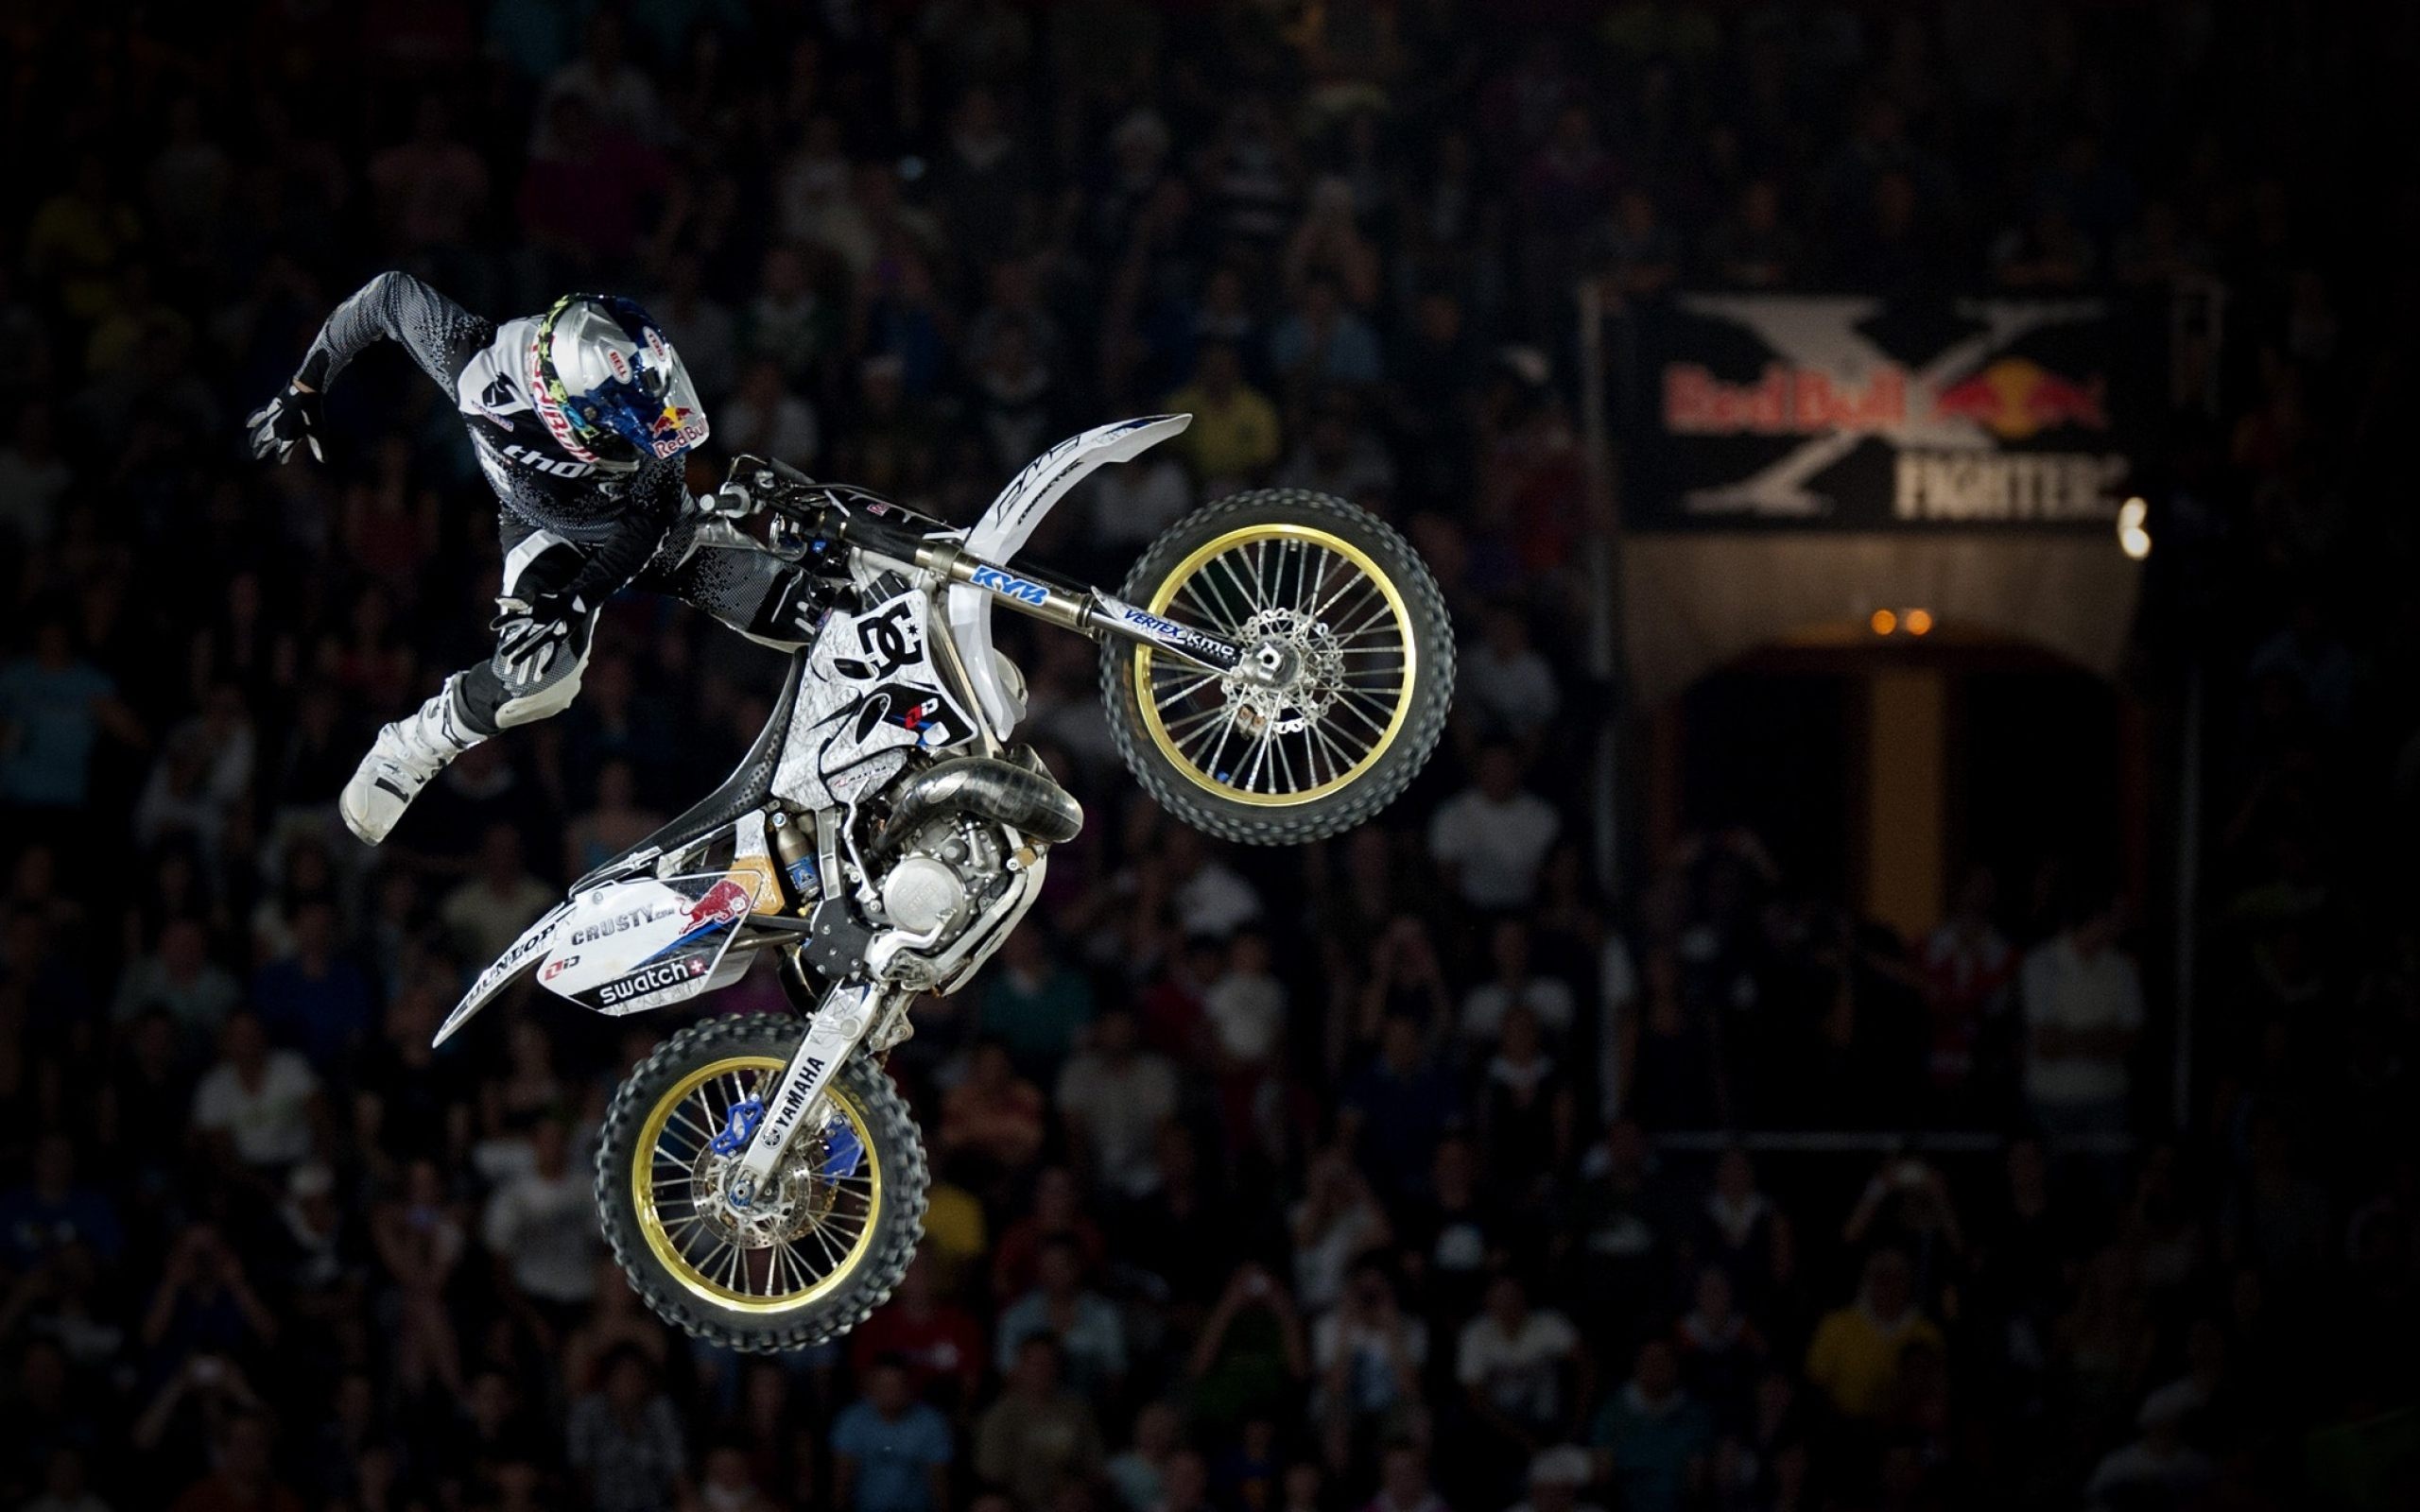 Stunt: Red Bull X Fighters motorcycle stunt riding competition, Dirt bike. 2560x1600 HD Wallpaper.